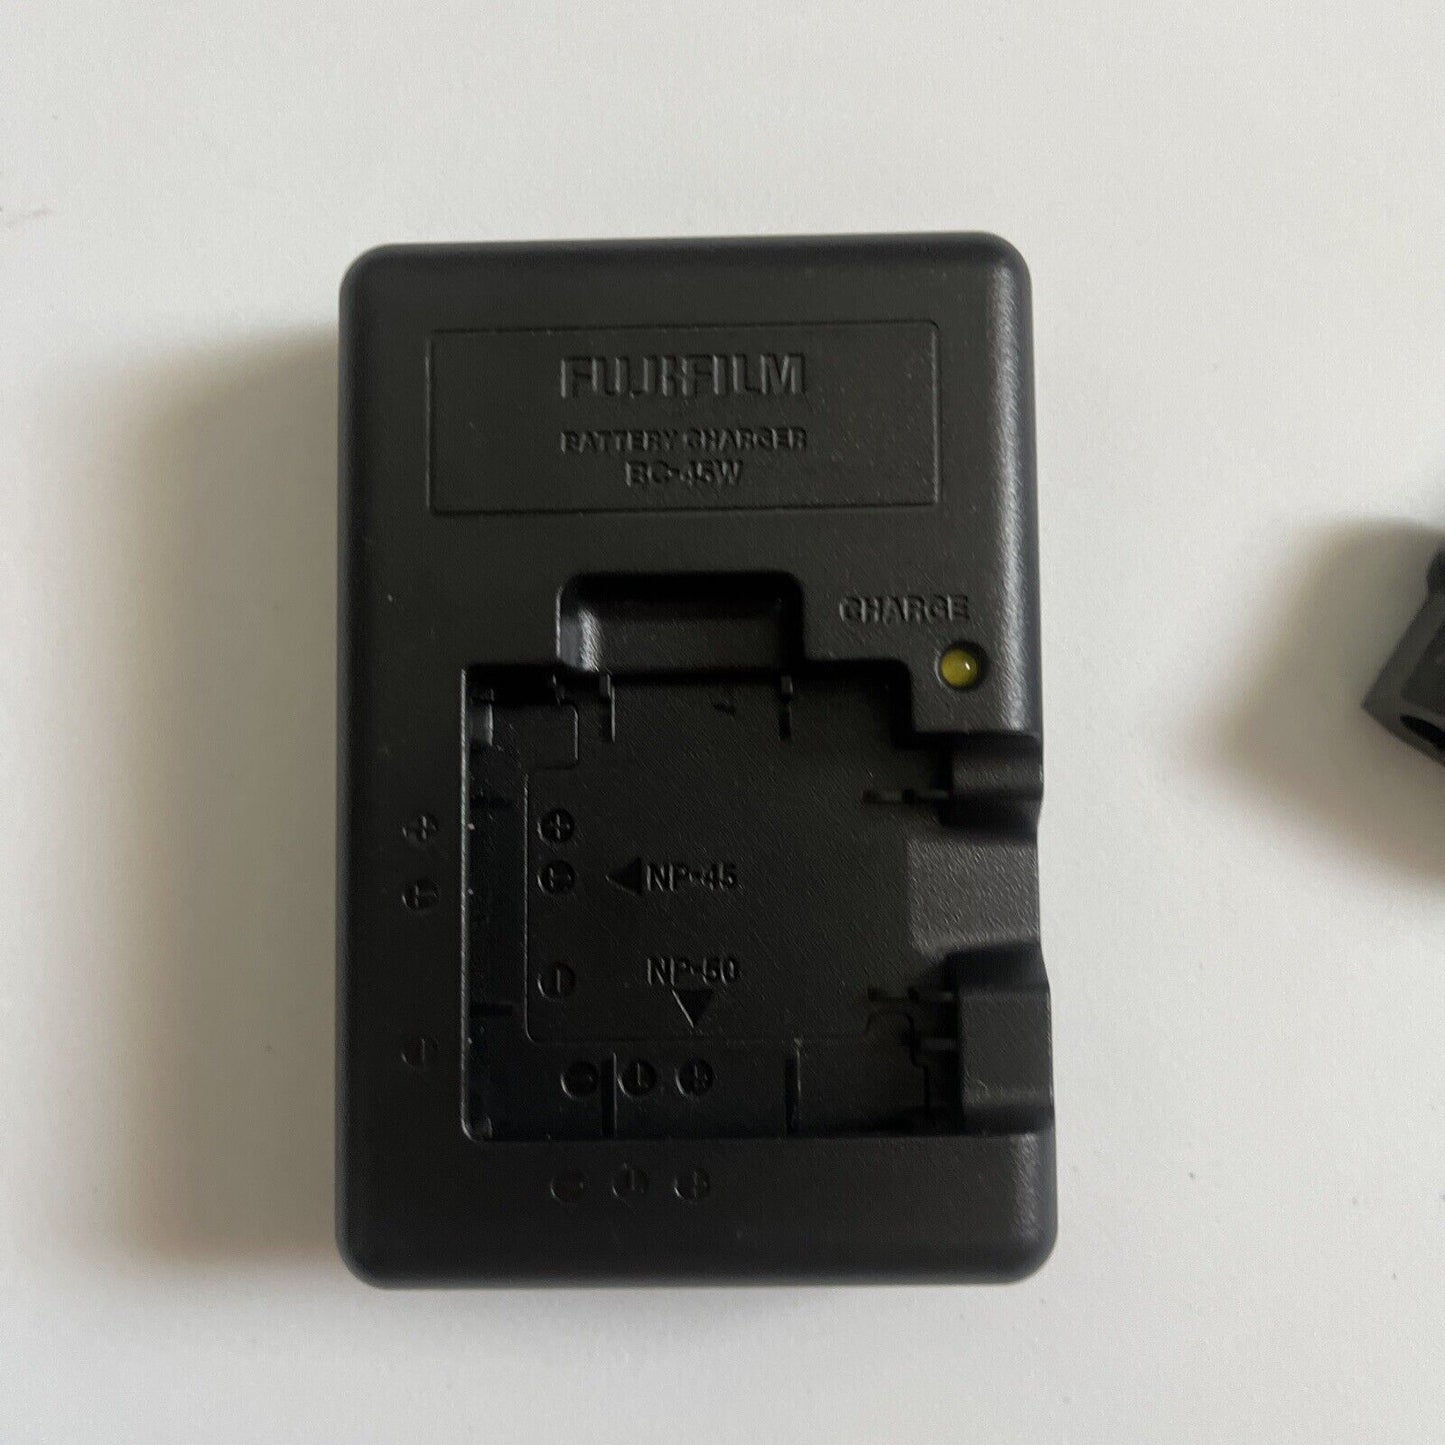 Genuine Fujifilm BC-45W Battery Charger for NP-45, NP-50 etc.